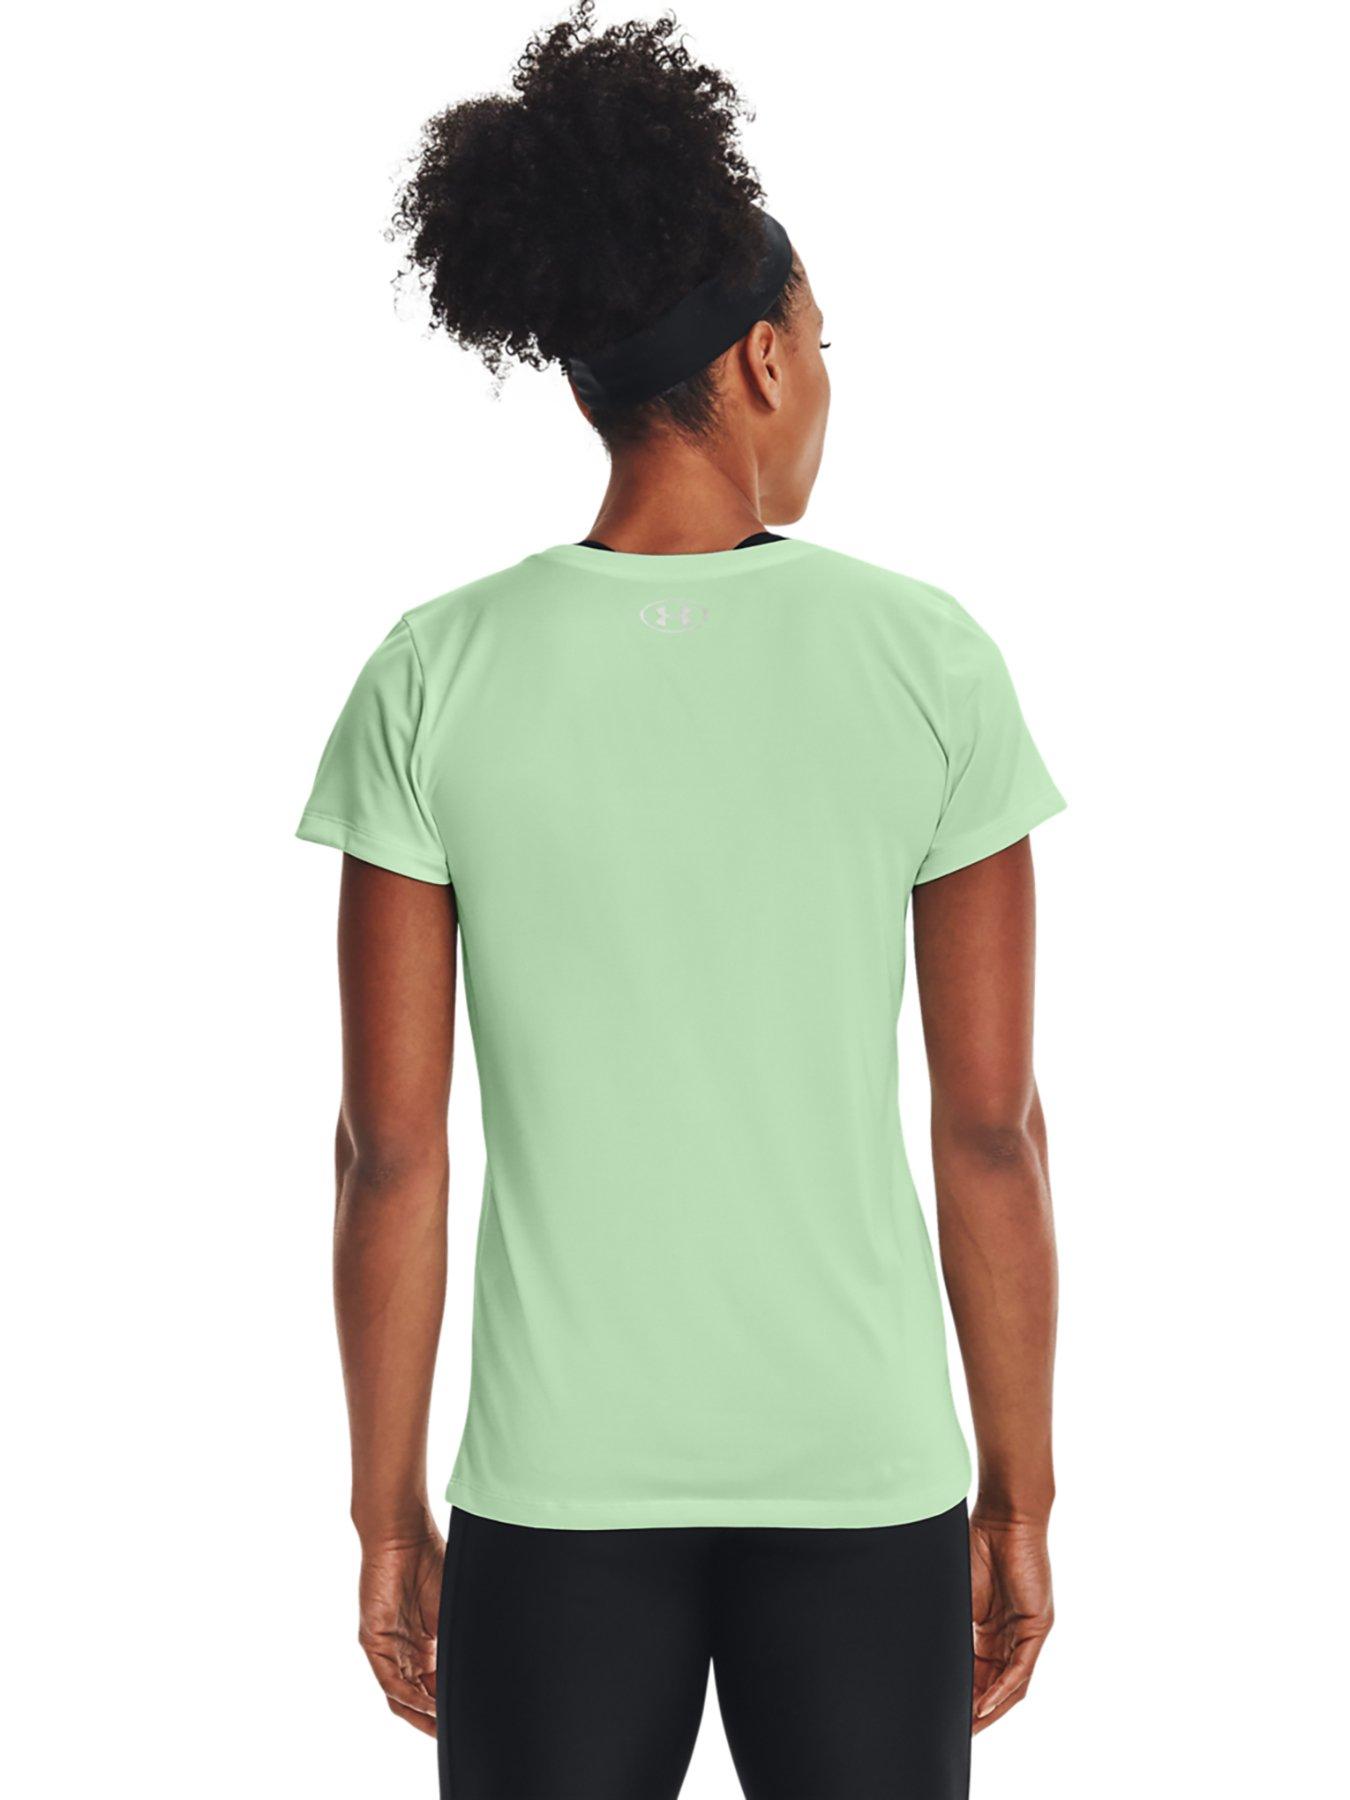 Tops & T-shirts Under Armour Training Twist Tech Top - Blue/Silver